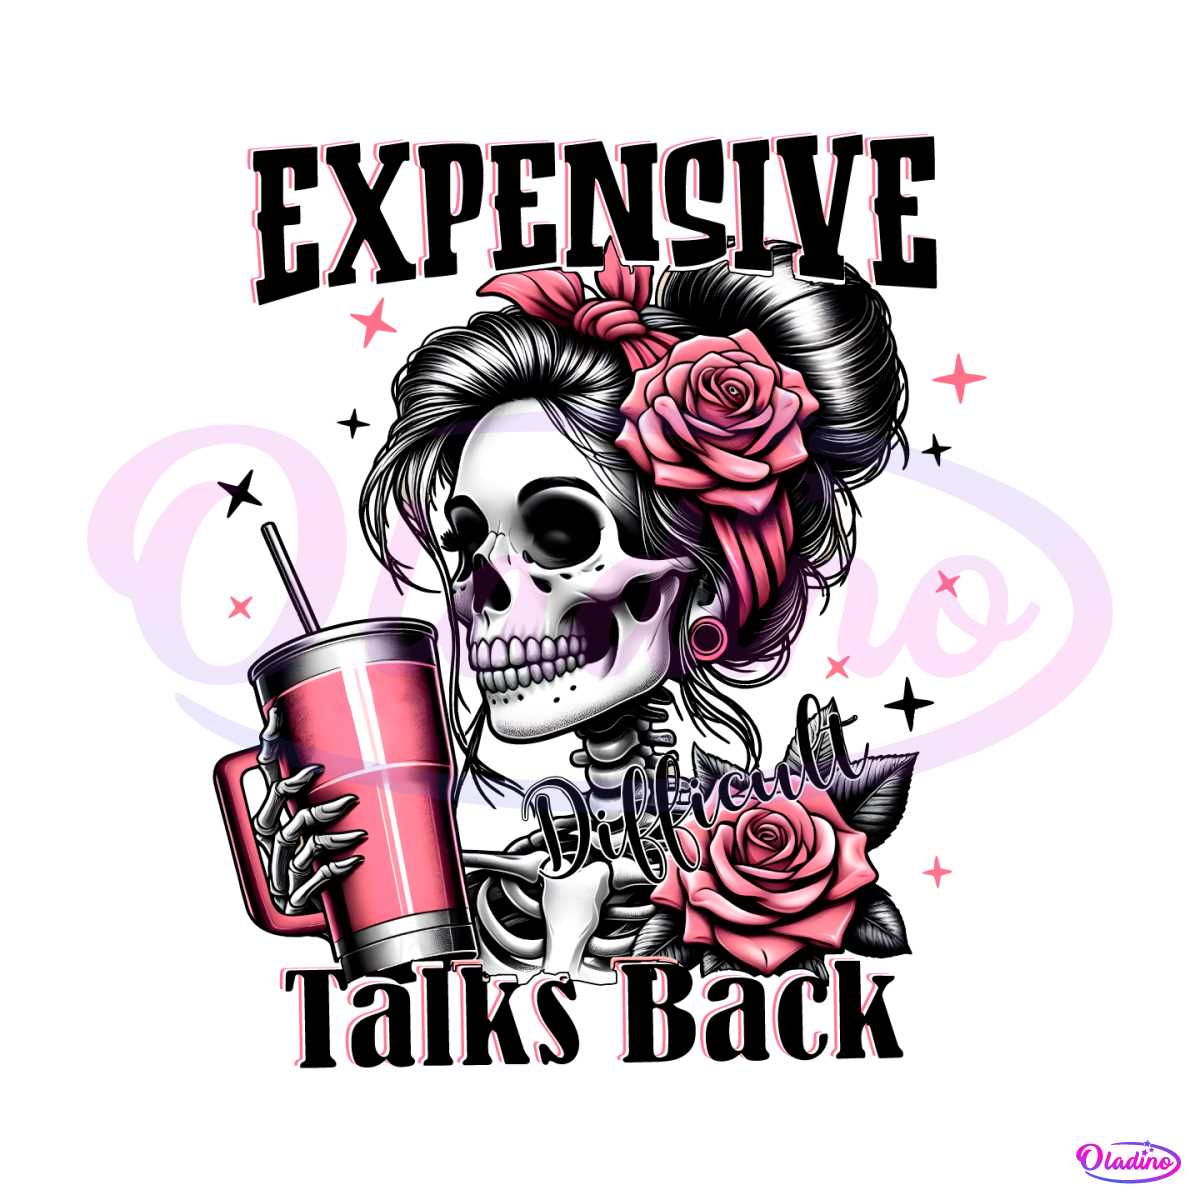 boujee-expensive-difficult-and-talks-back-coffee-mom-png